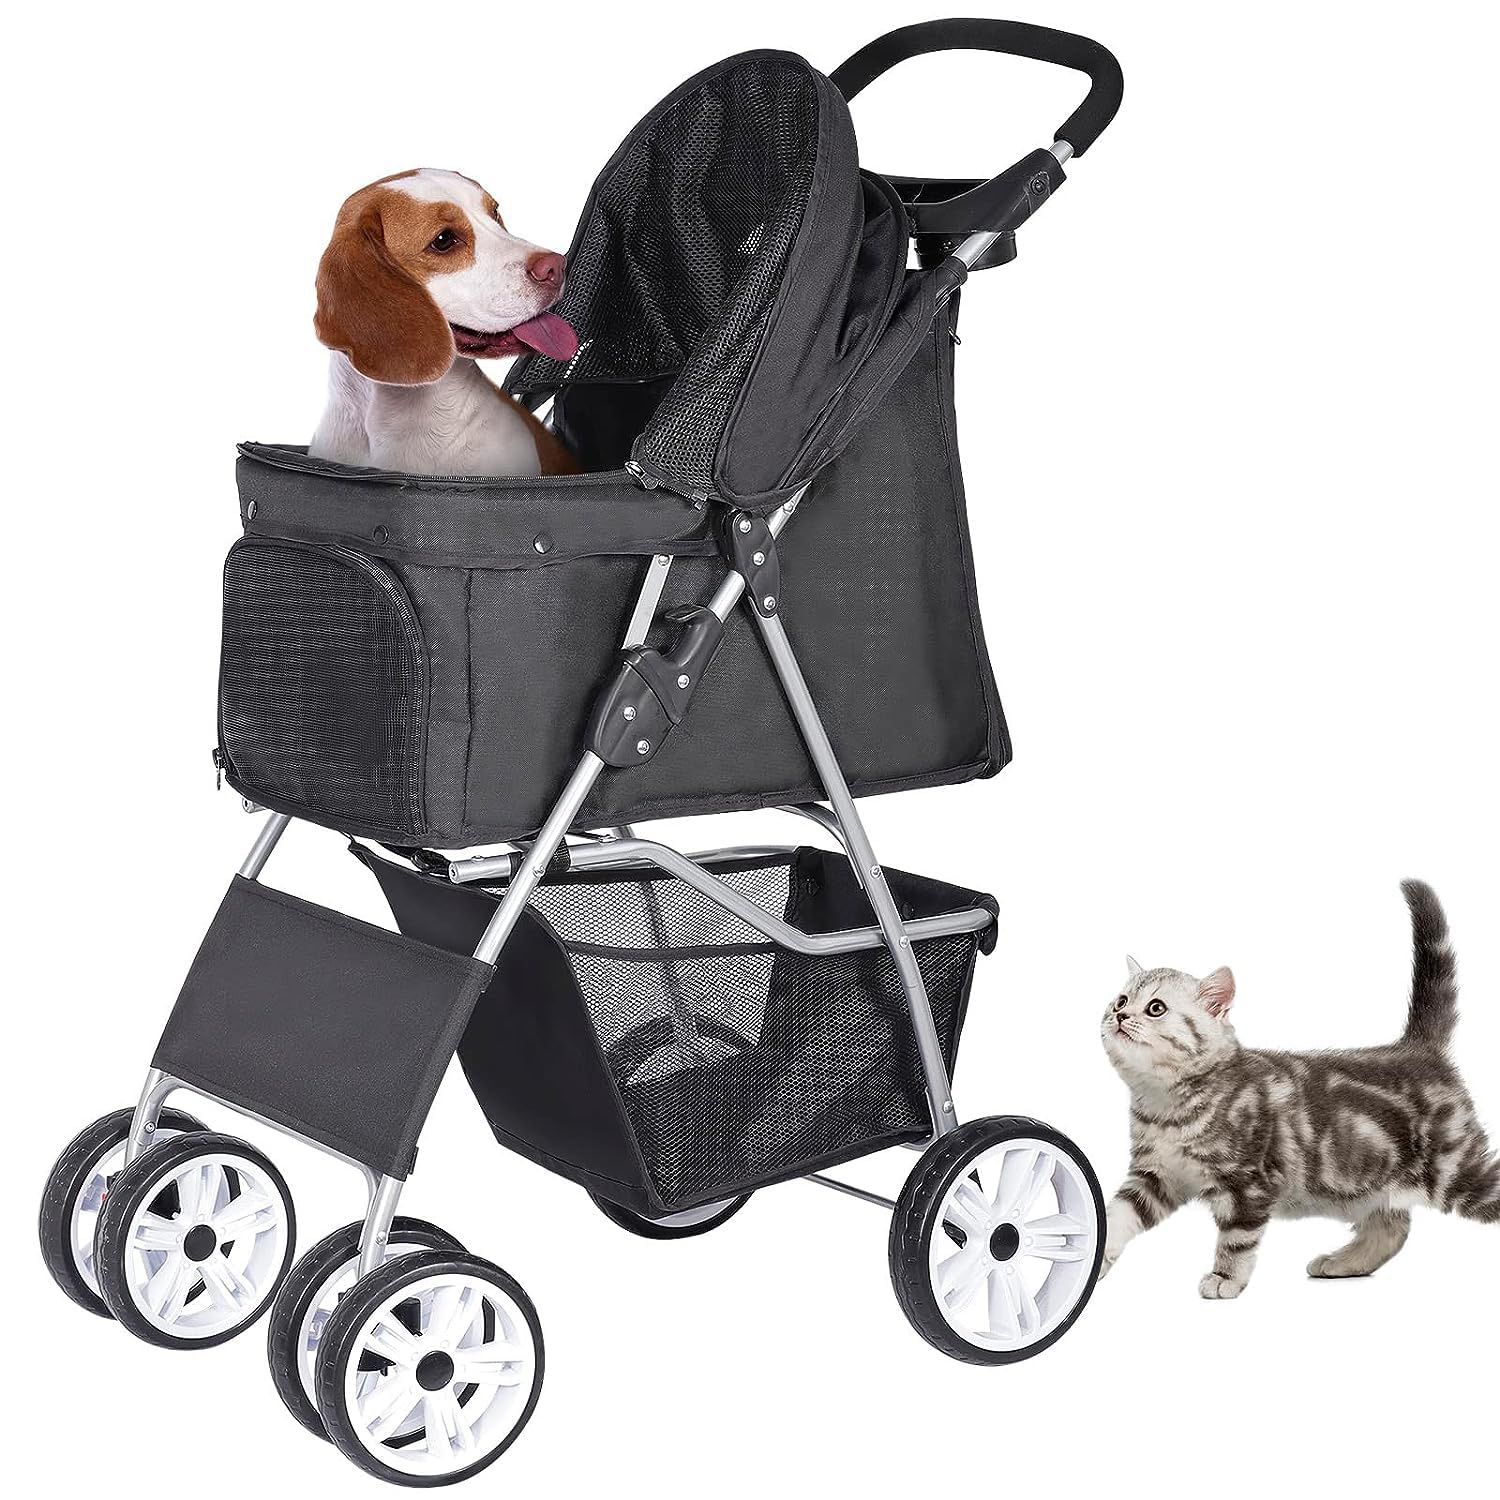 Pet Stroller for Cats/Dogs - 4 Wheels Foldable Carrier Strolling Cart